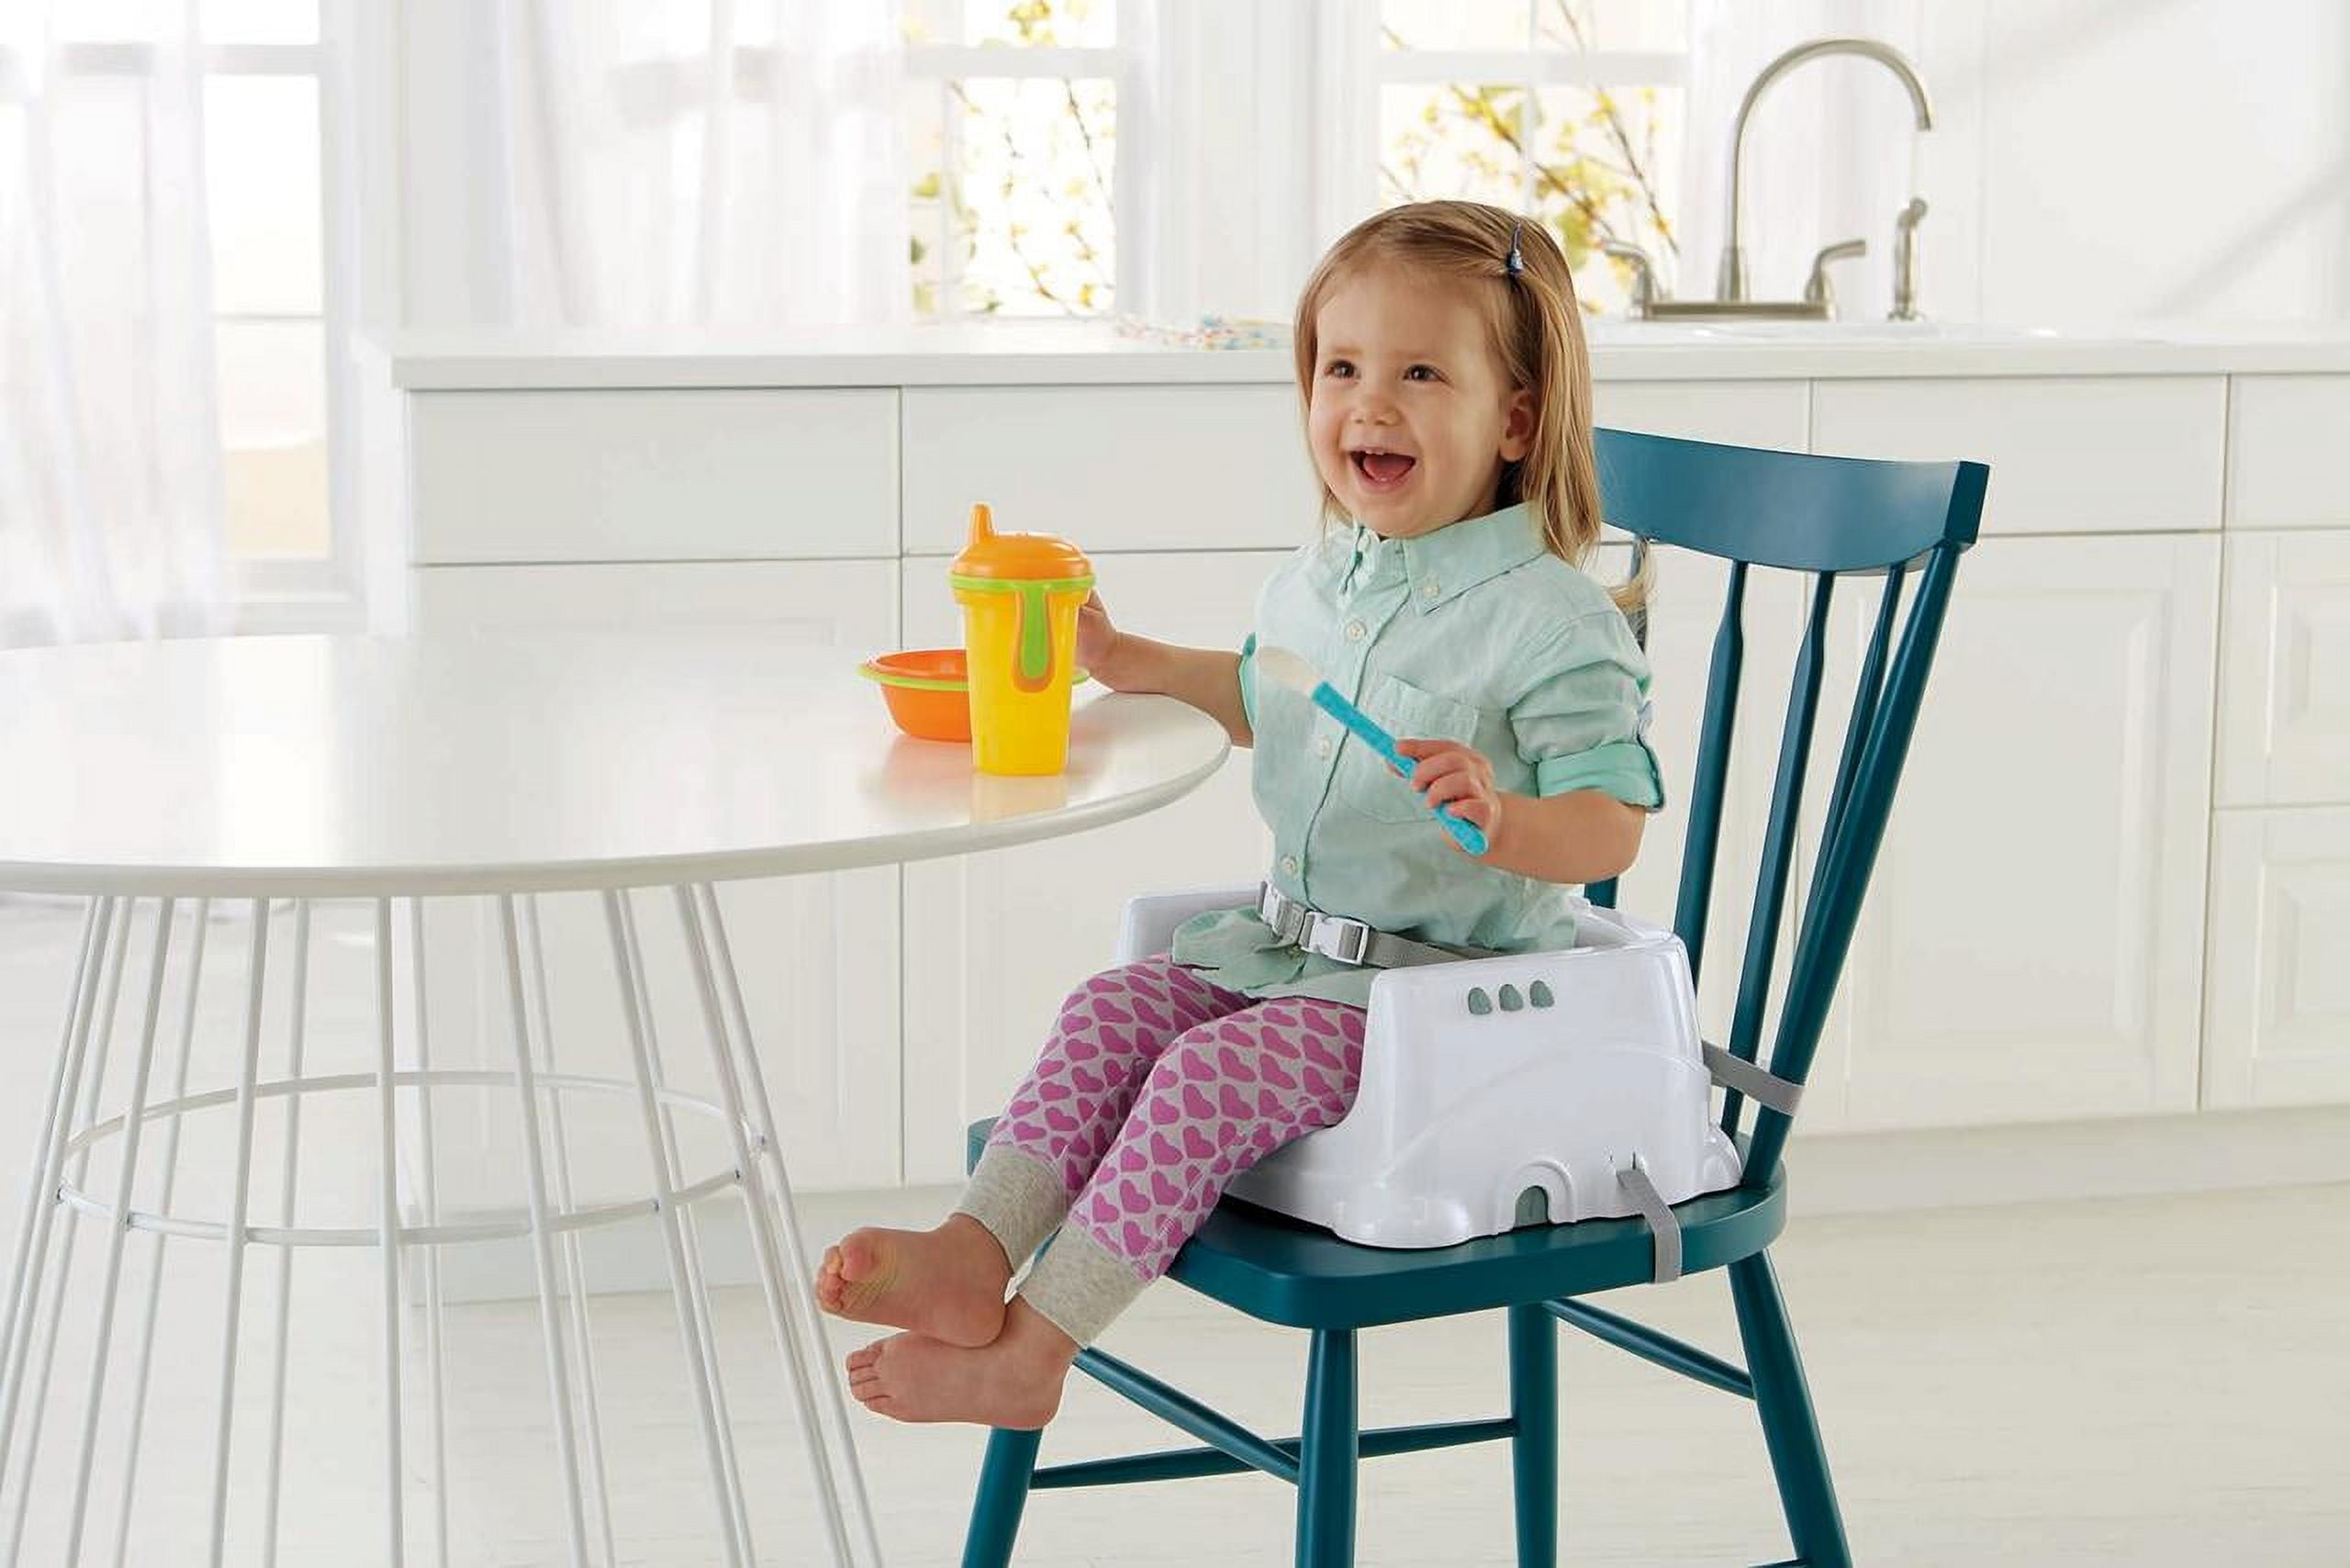 Fisher-price Healthy Care Booster Seat : Target